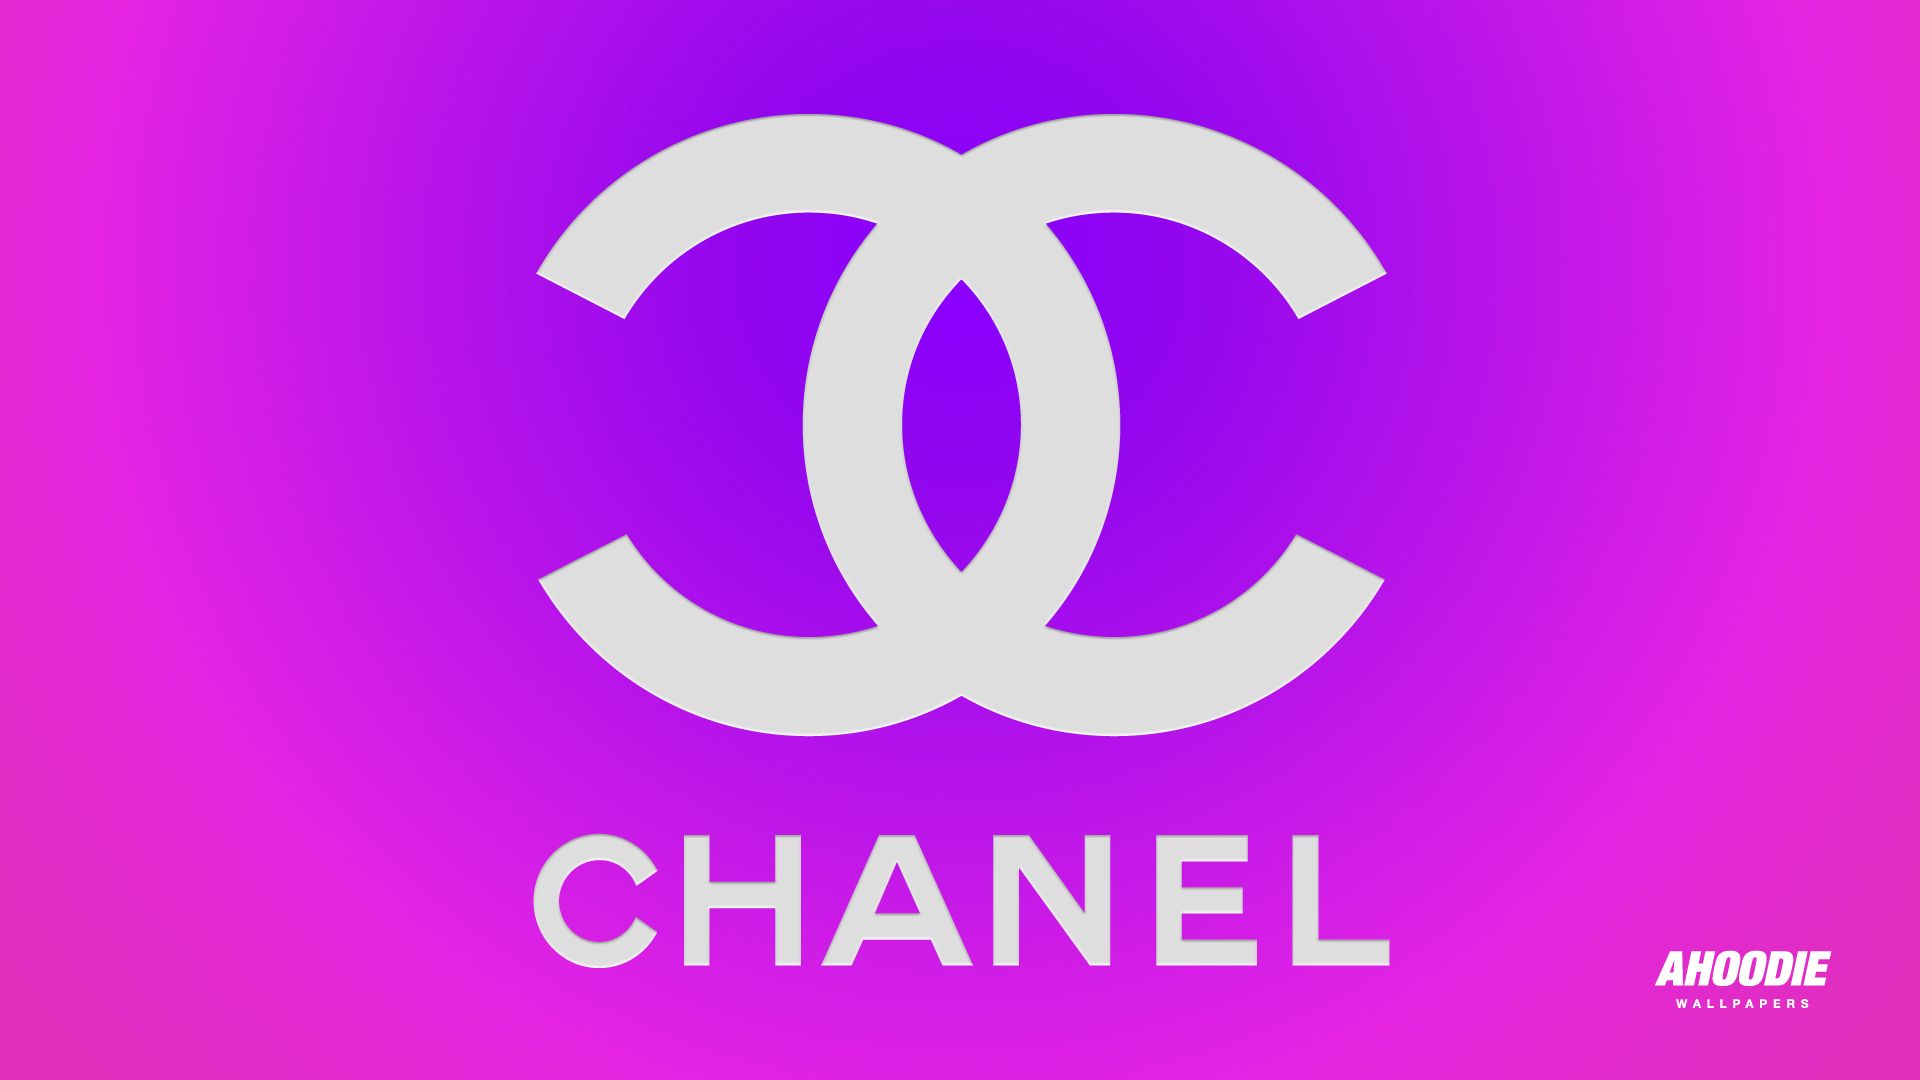 46+] Chanel Wallpapers HD